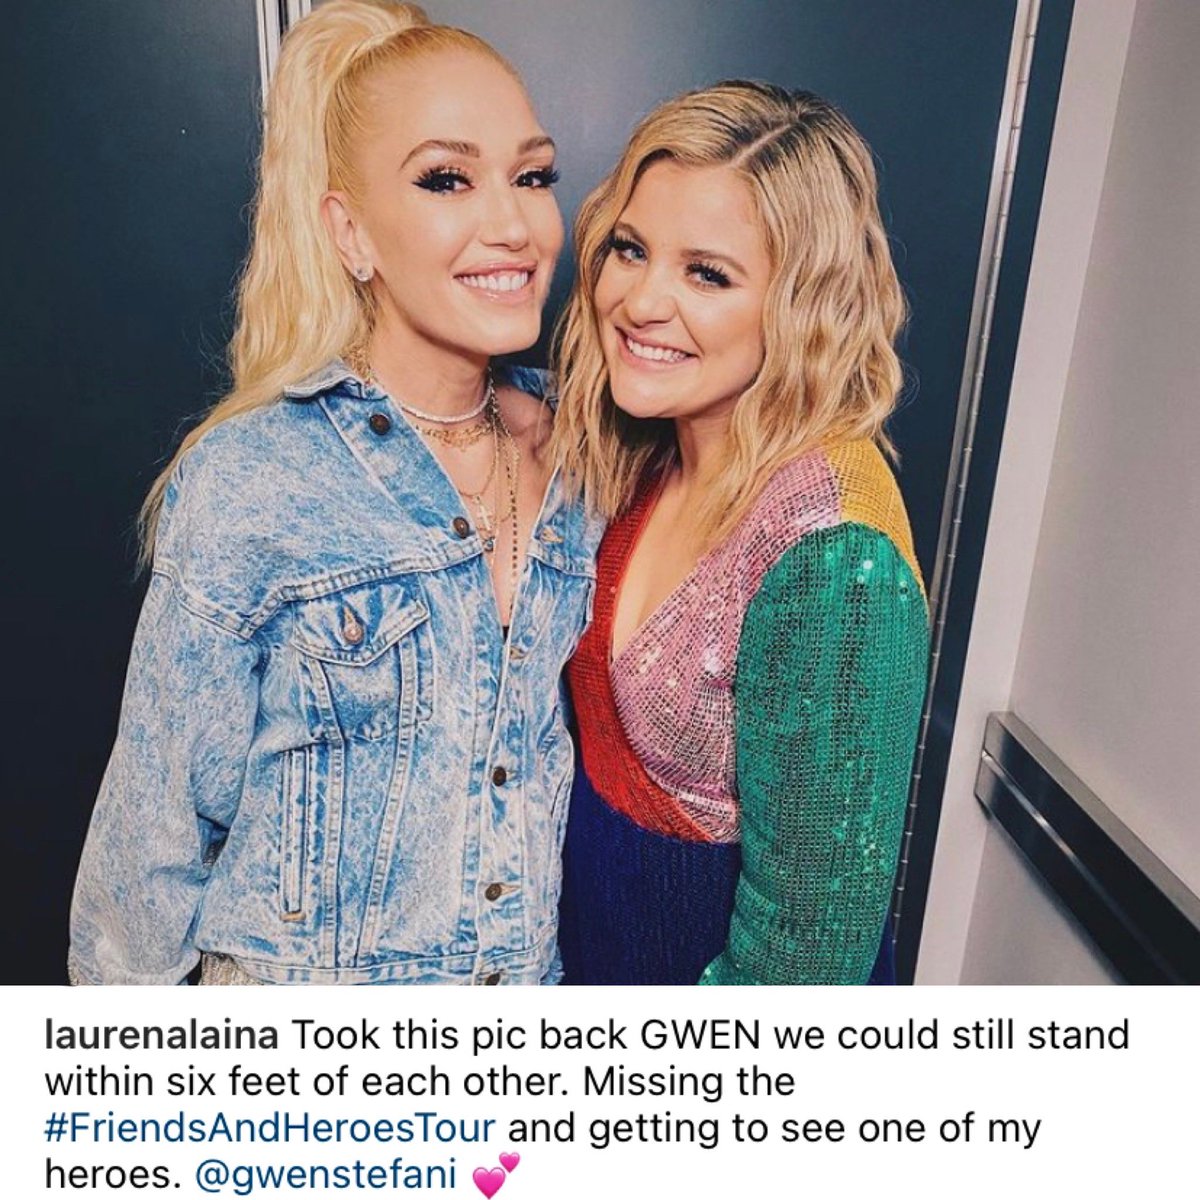 I came on the bus and she was in her pajamas, and she was 'just a girl.' I was so excited, and she was so kind. ... People like Gwen Stefani helped me find my voice. ... I grew up really proud to be a woman because of songs like "Just a Girl." - Lauren Alaina